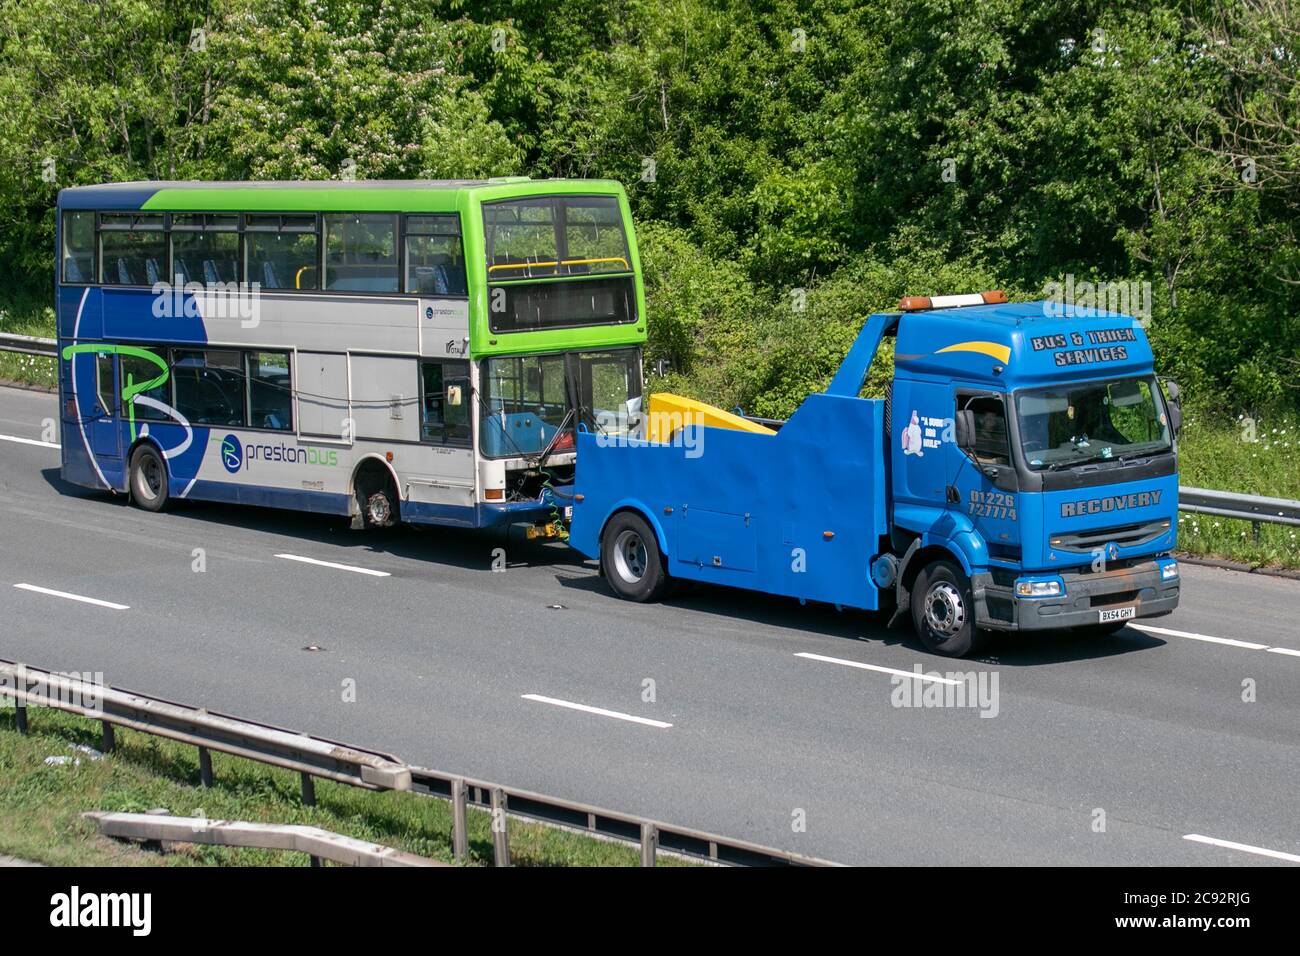 Preston Bus double-decker old PSV being towed by Bus & Truck Services heavy haulage Renault breakdown vehicle; roadside 24 hour recovery service, Chorley UK Stock Photo